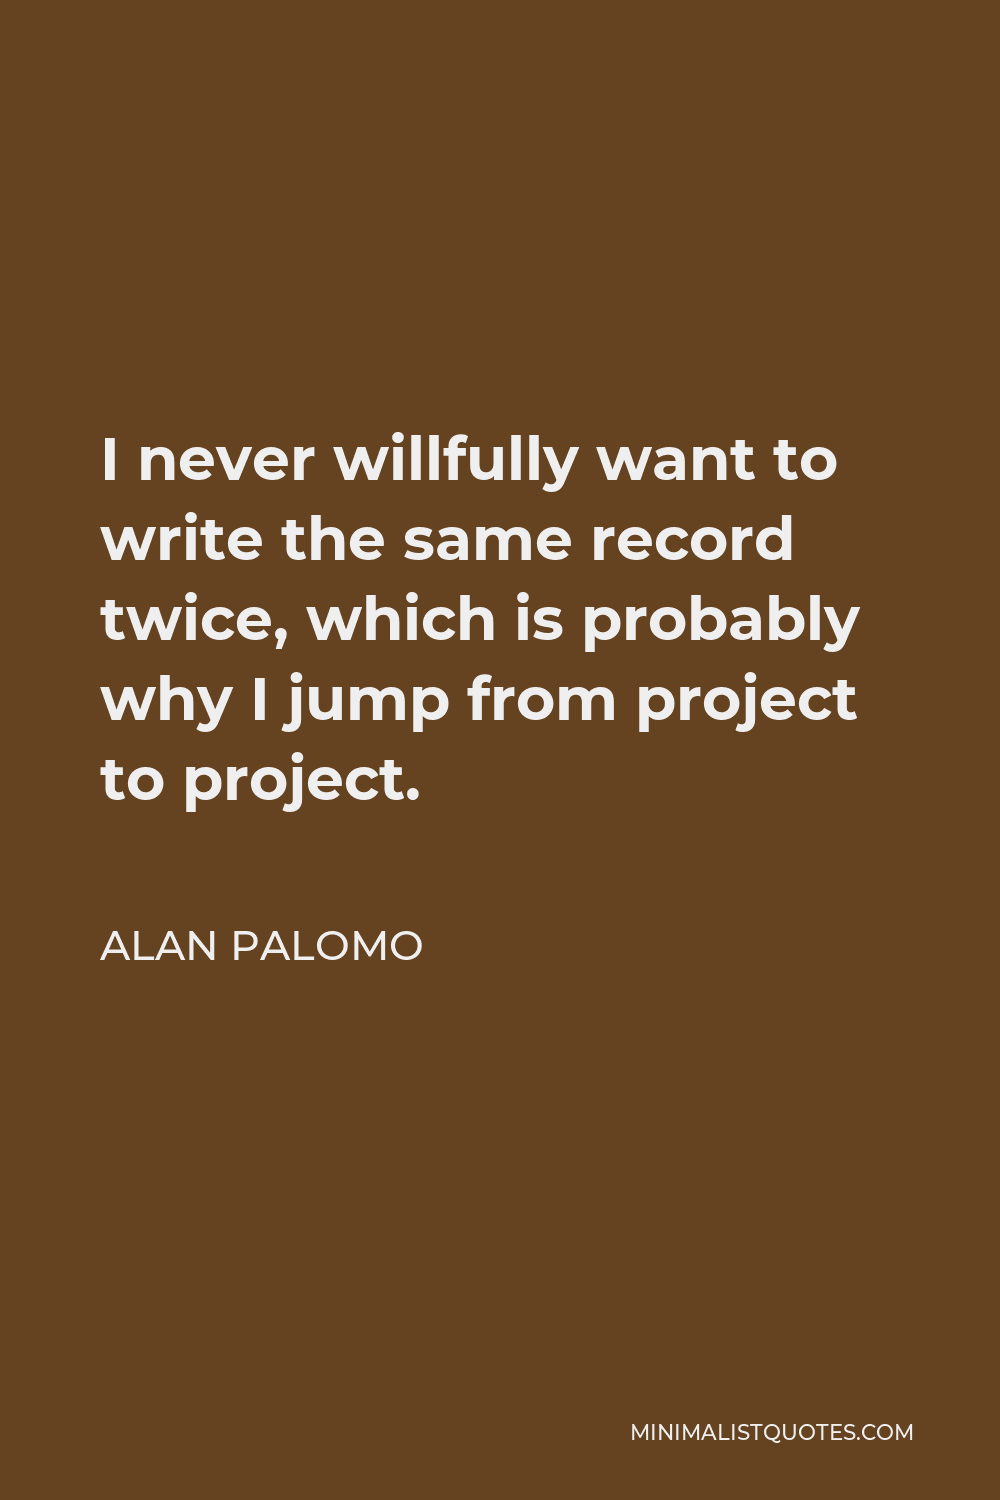 Alan Palomo Quote - I never willfully want to write the same record twice, which is probably why I jump from project to project.